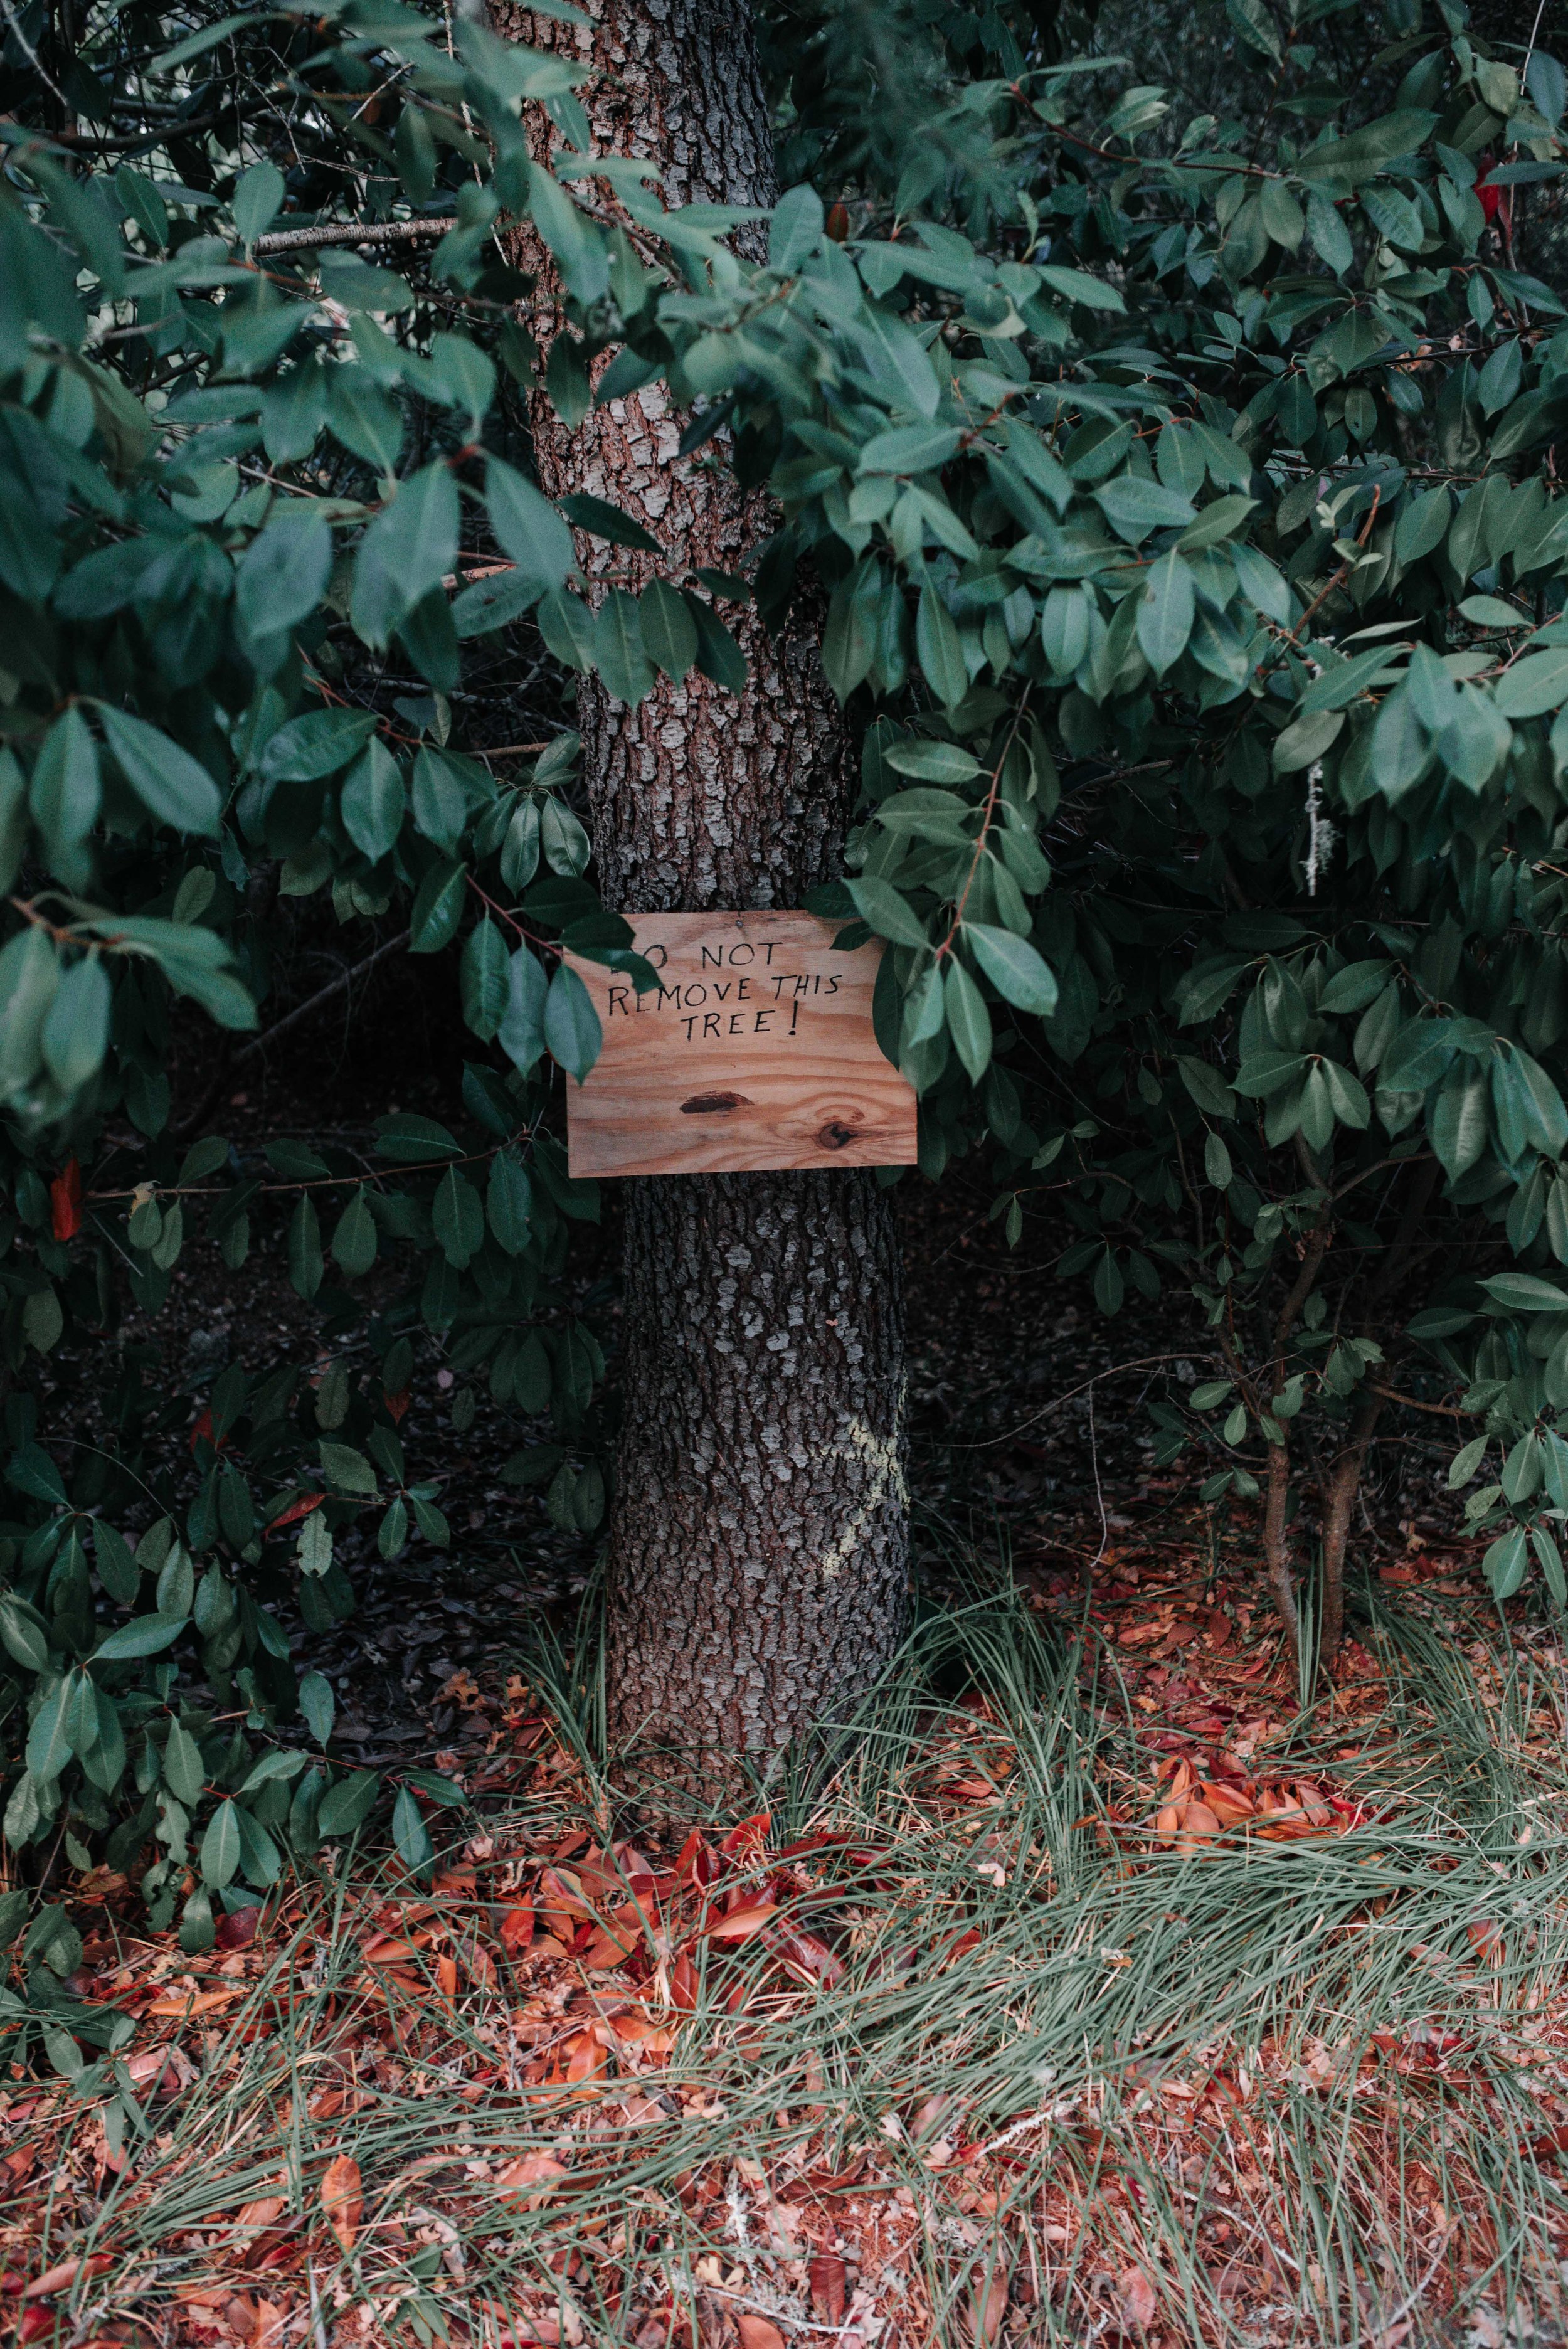  Property owners make their voices known through community meetings and hand-made signs placed upon marked trees. 